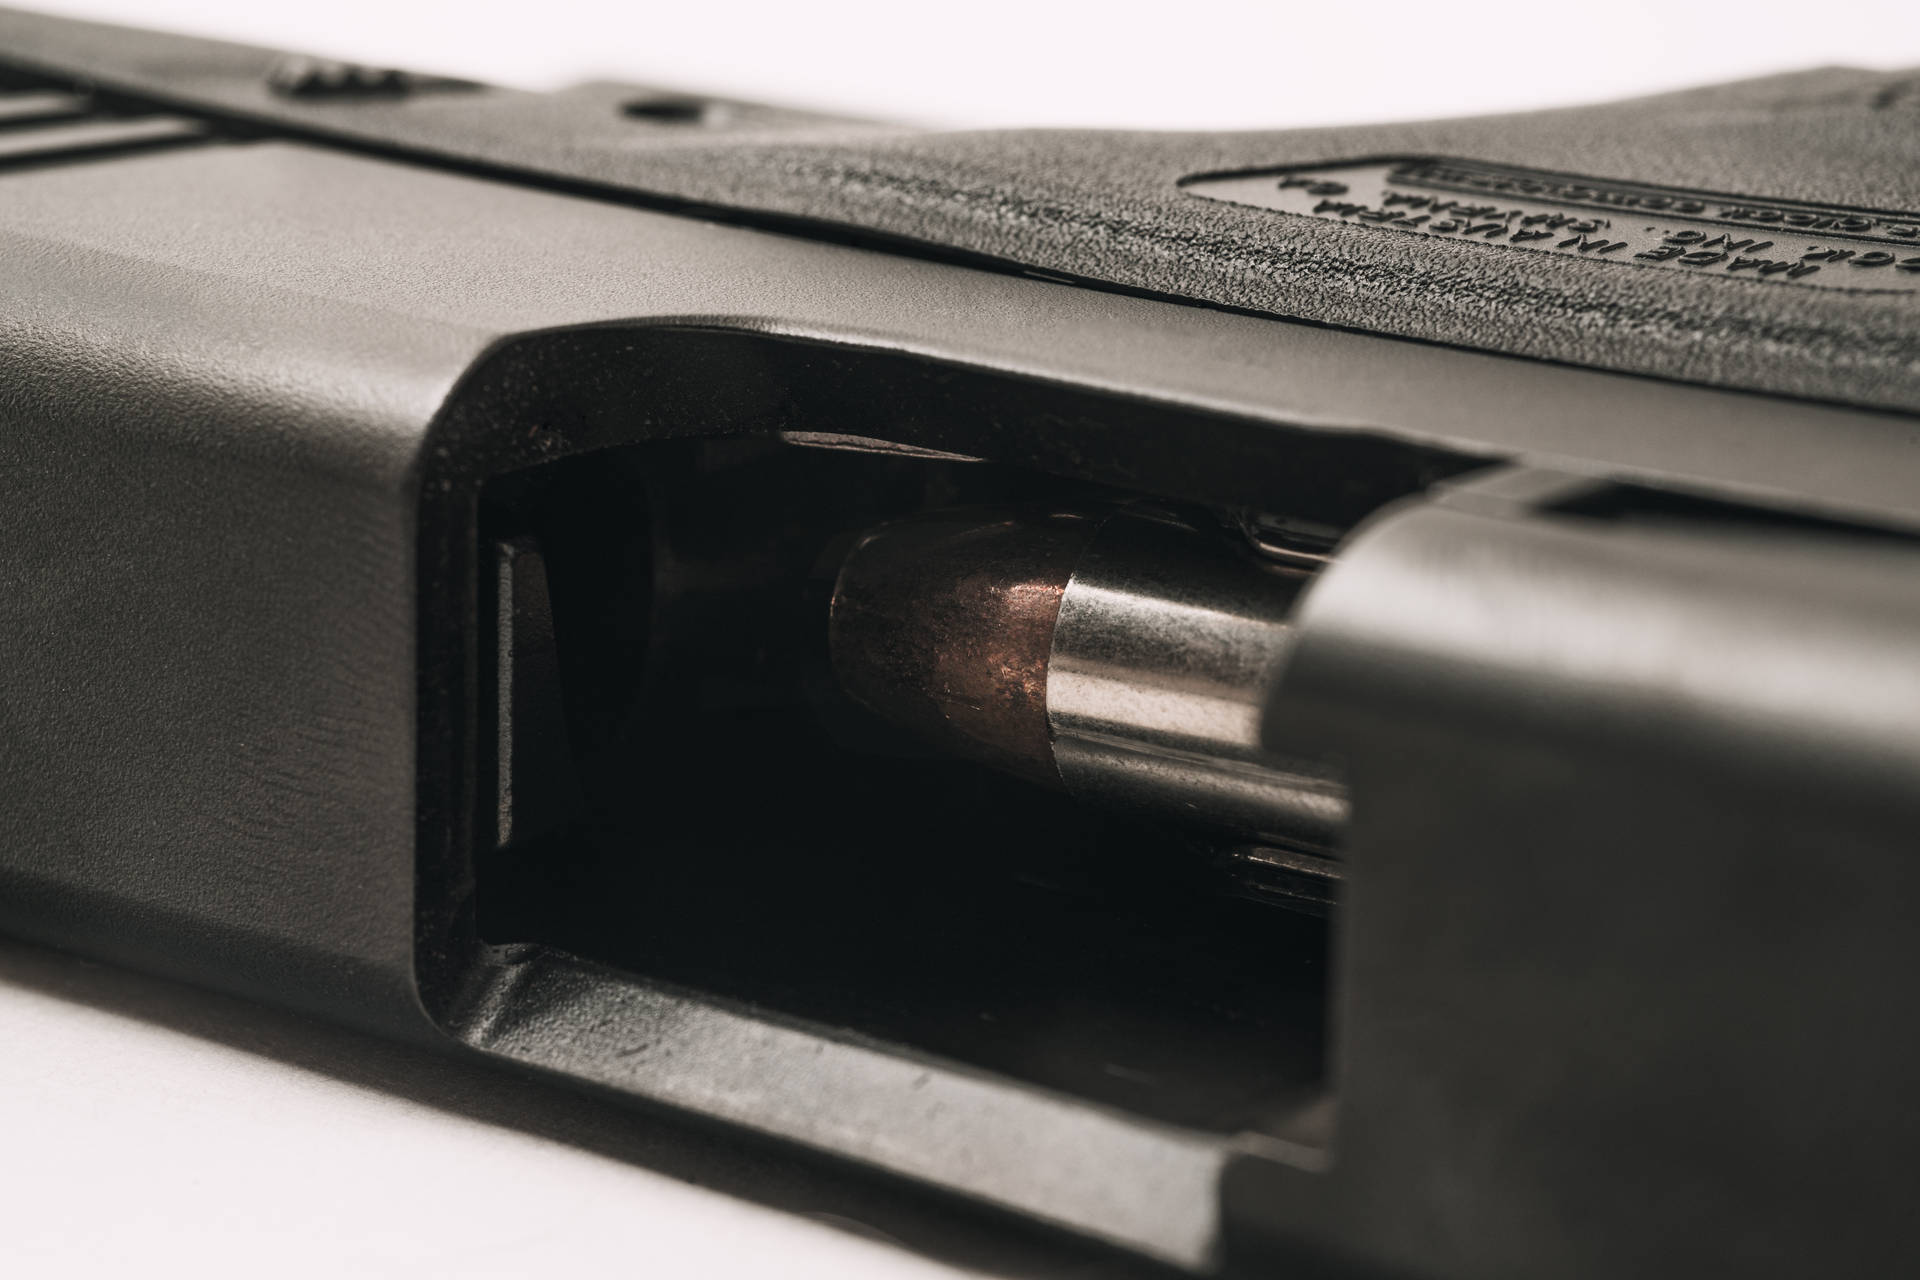 Glock Chamber Loaded With Bullet